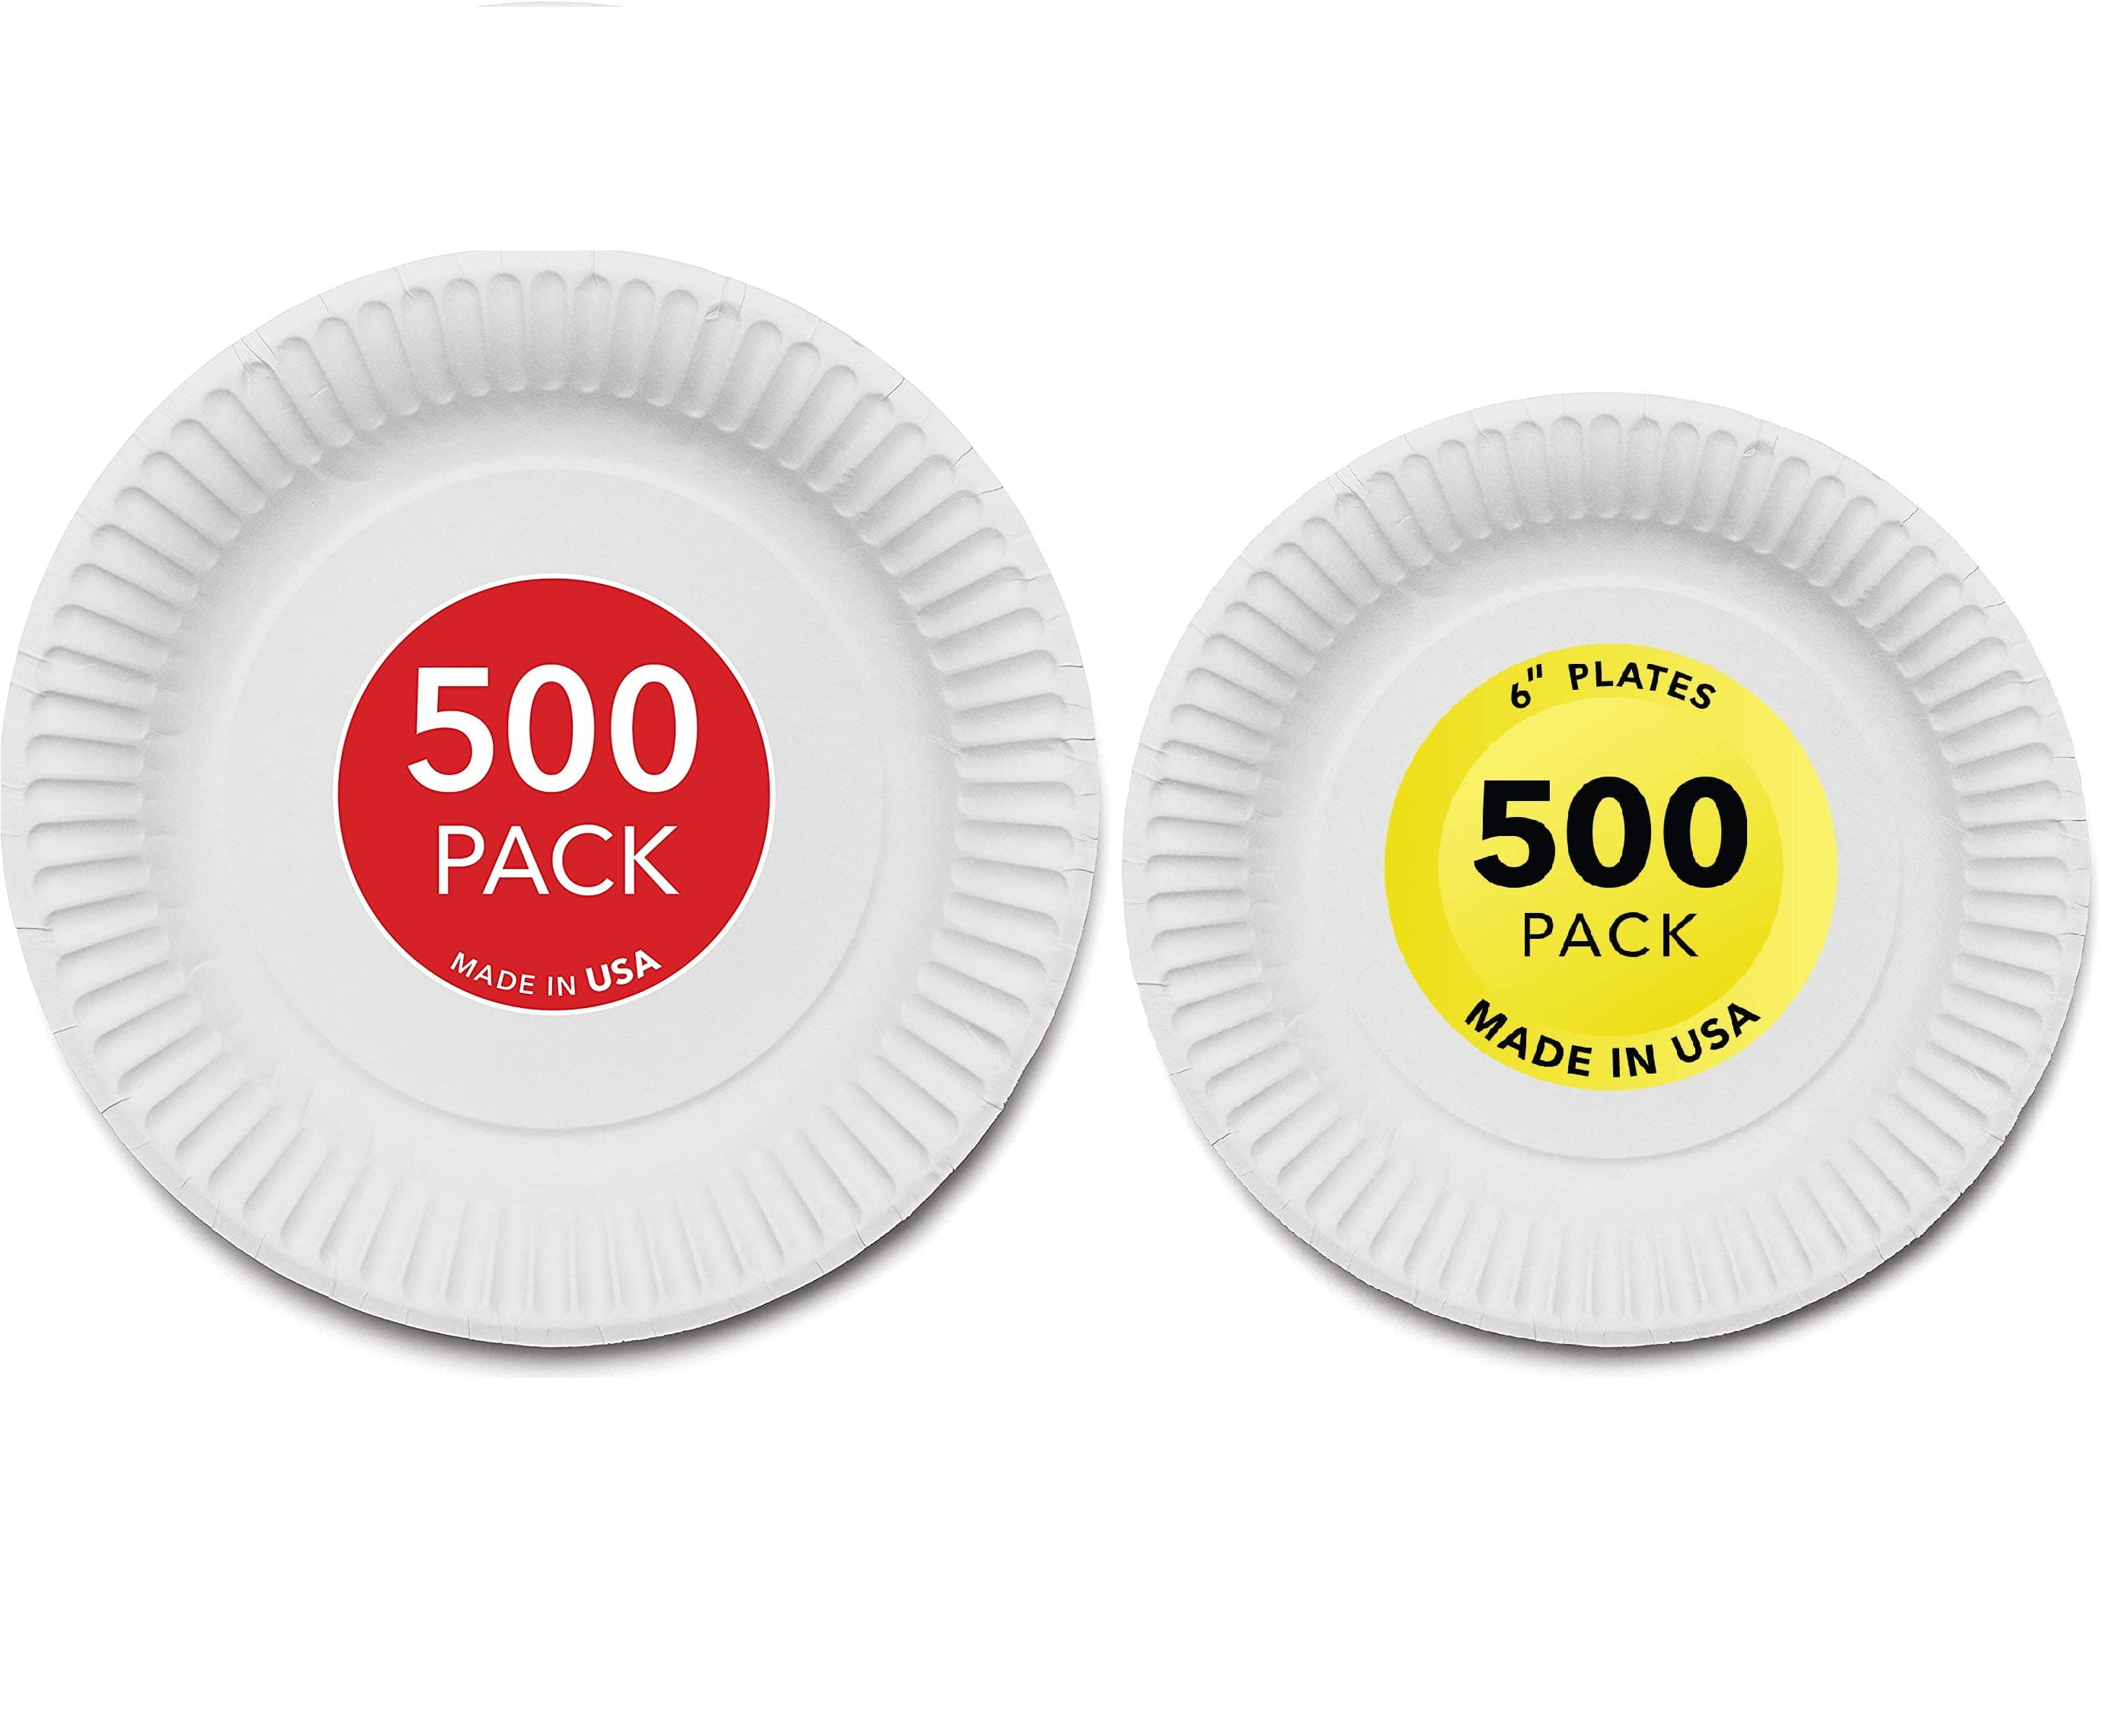 500 Count White Stock Your Home 9-Inch Paper Plates Uncoated Everyday Disposable Plates 9 Paper Plate Bulk